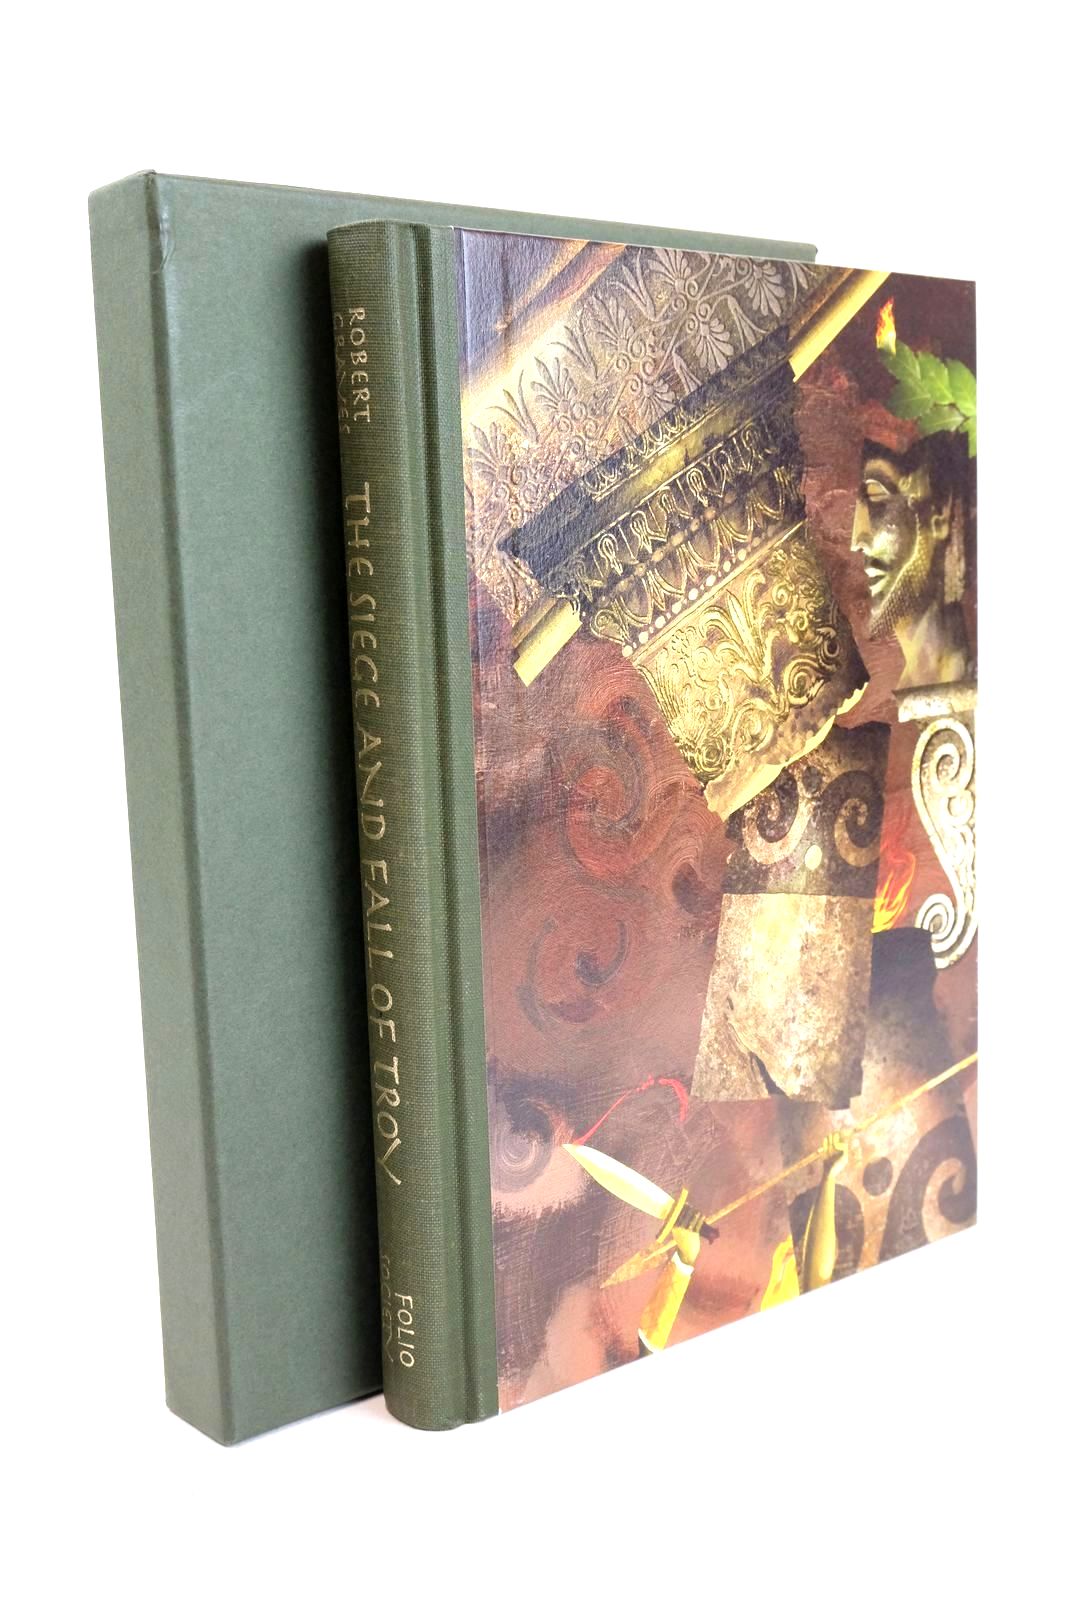 Photo of THE SIEGE AND FALL OF TROY written by Graves, Robert Norfolk, Lawrence illustrated by Baker, Grahame published by Folio Society (STOCK CODE: 1326770)  for sale by Stella & Rose's Books